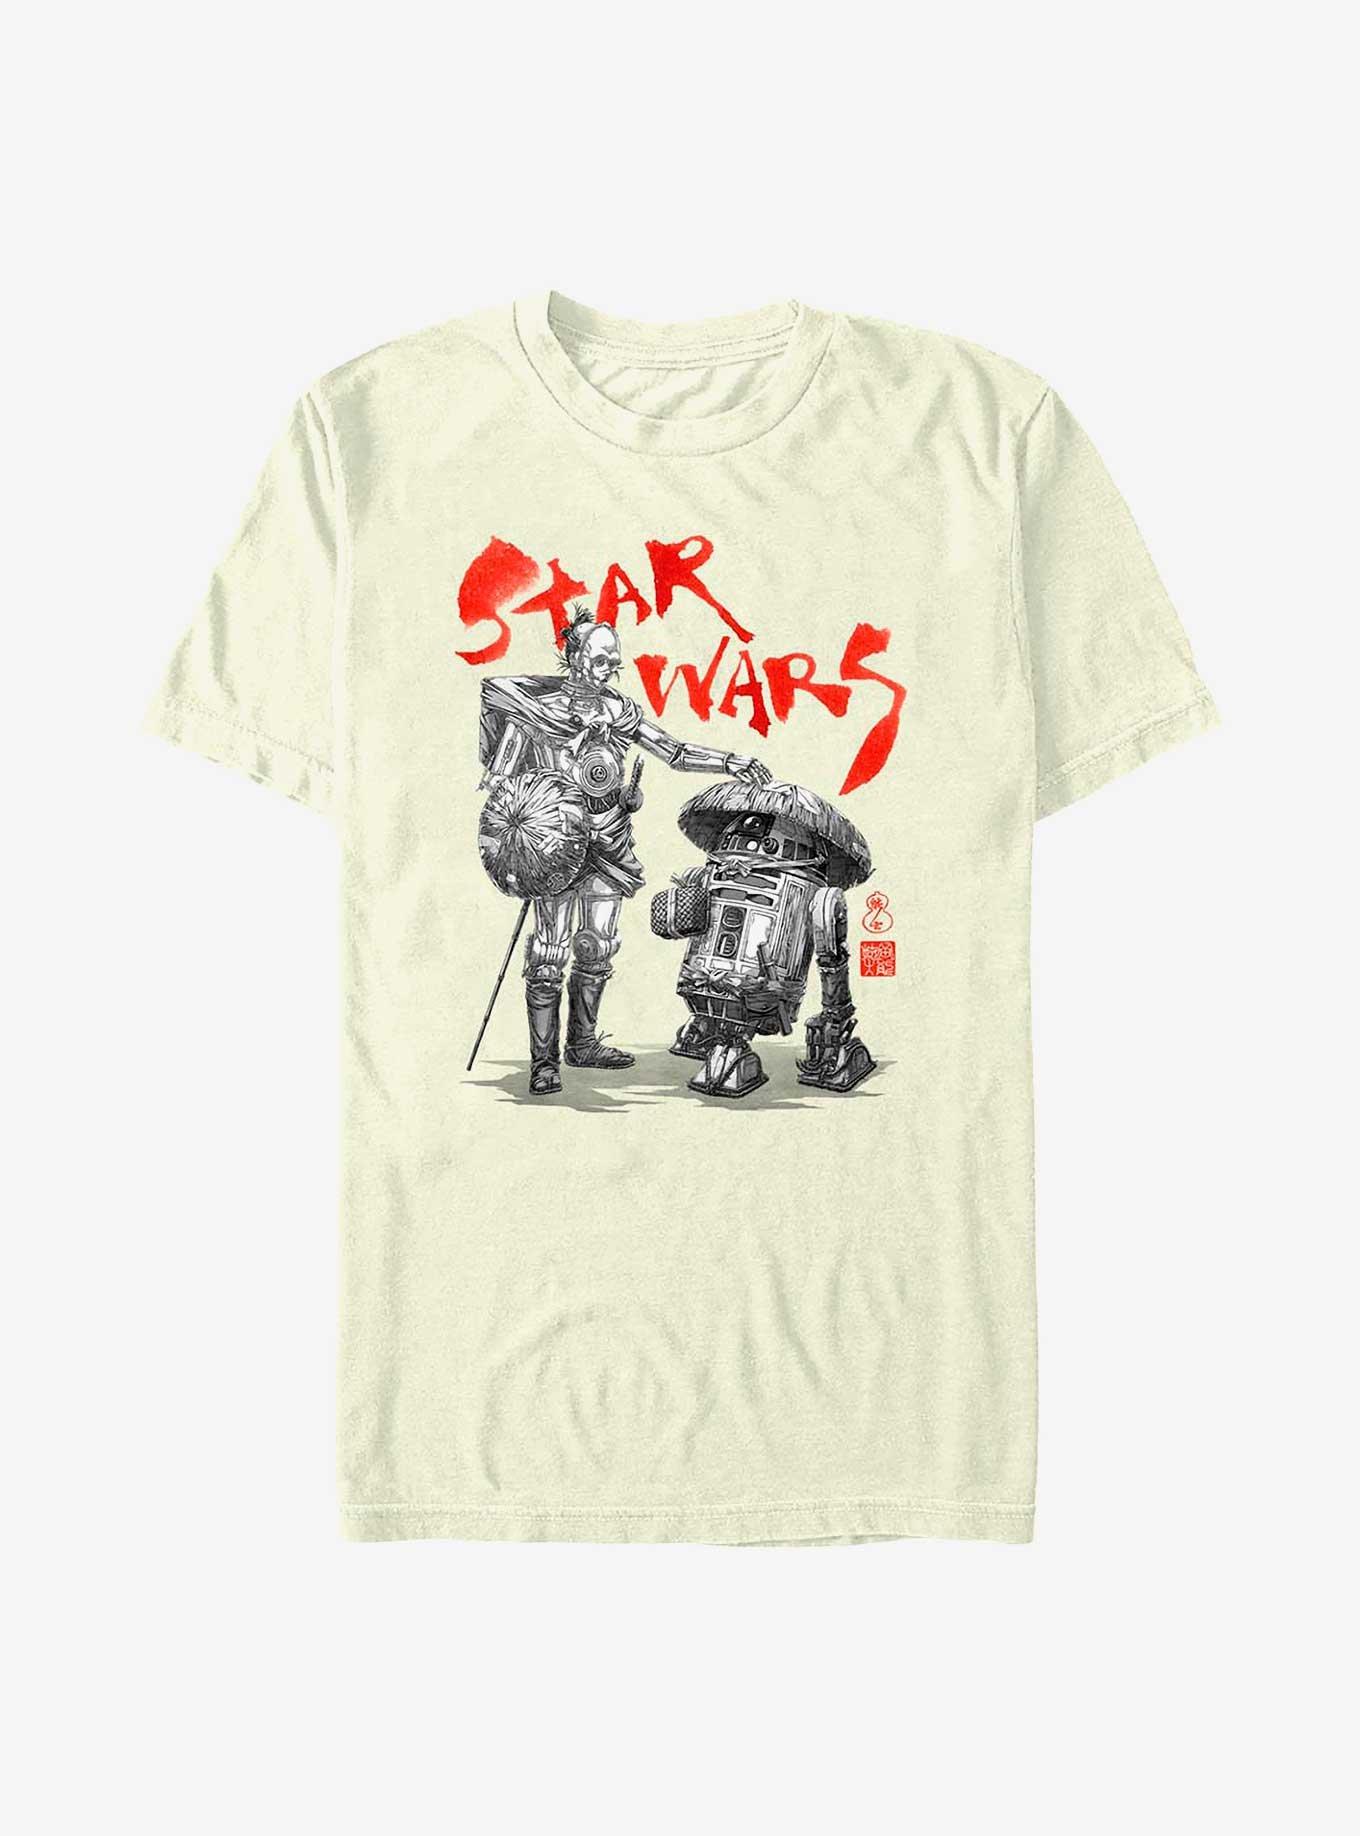 Star Wars: Visions Anime Droids T-Shirt